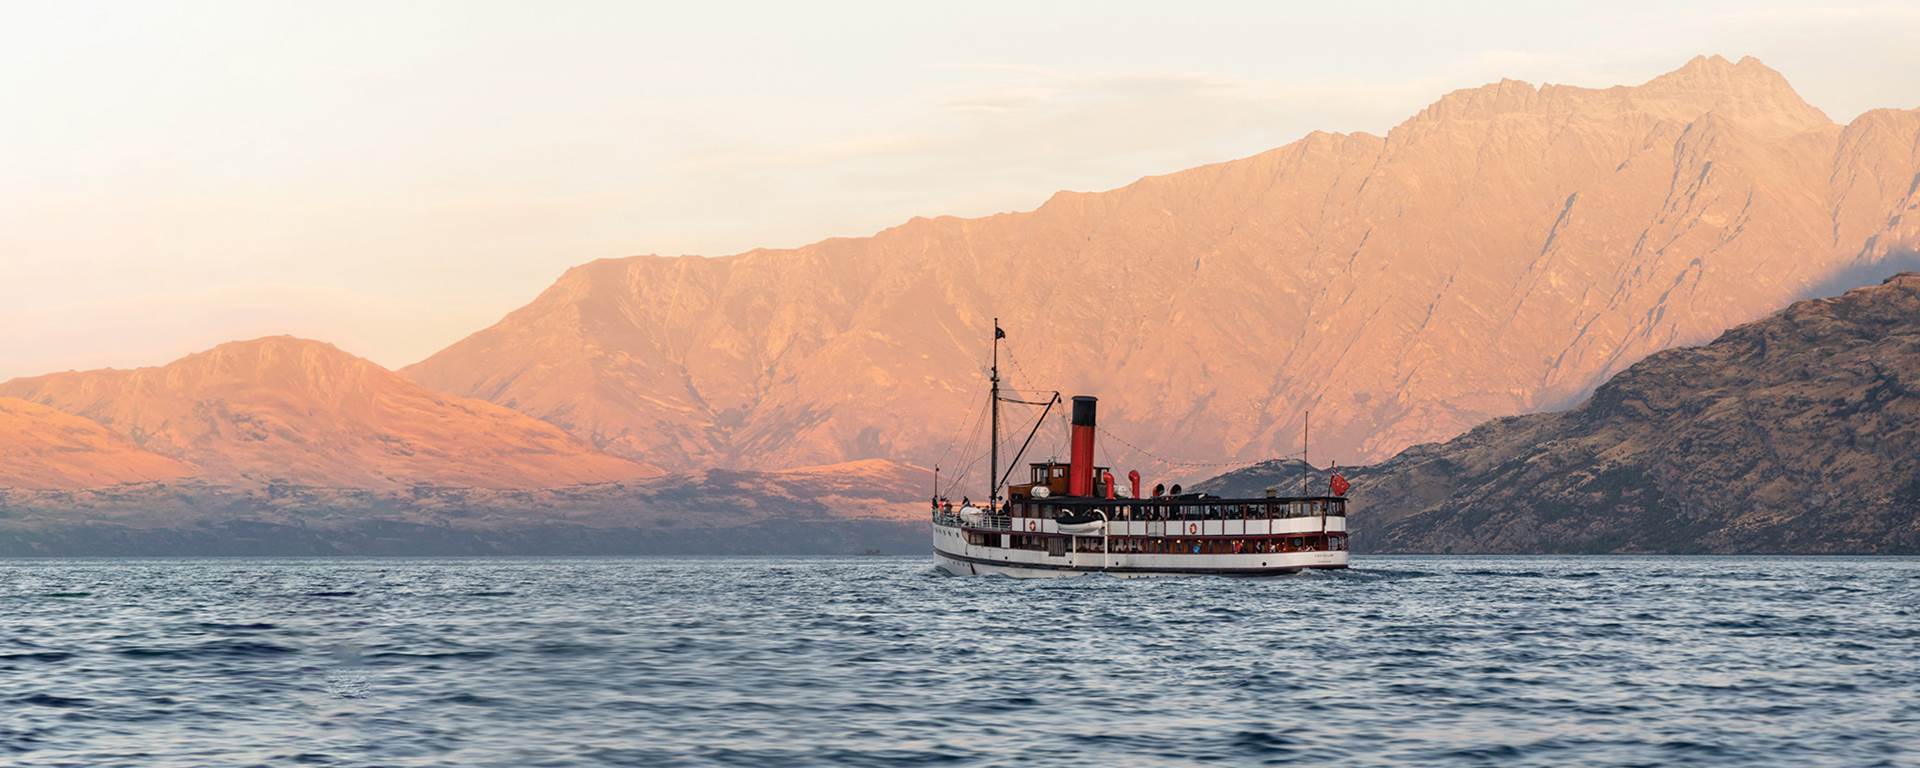 The Tss Earnslaw sails in front of the Remarkables